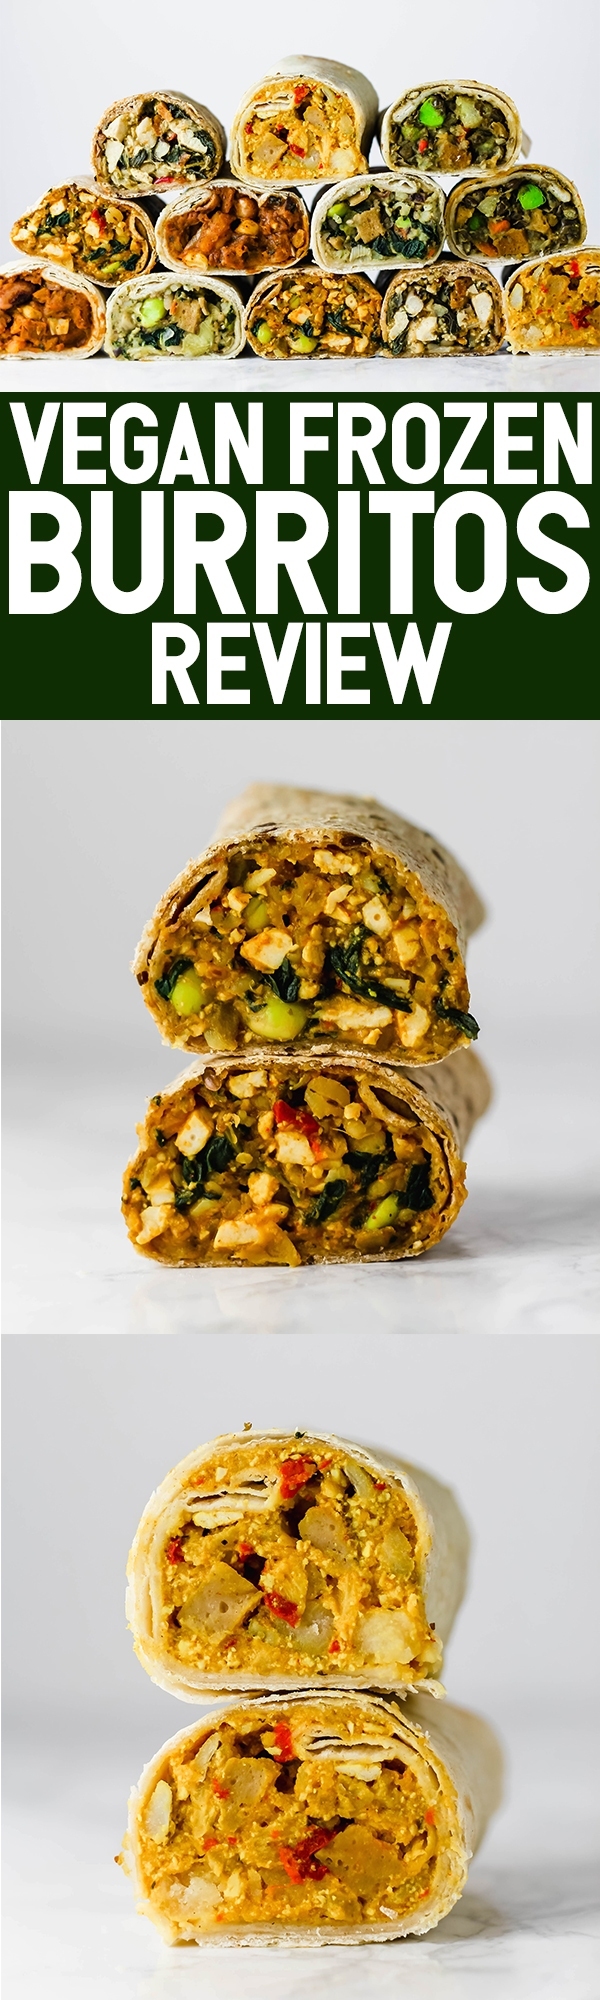 If you need to stock your freezer with easy meals for busy days, try some of Sweet Earth’s plant-based frozen burritos! I’m reviewing six different flavors to help you find one (or more!) you’ll love.